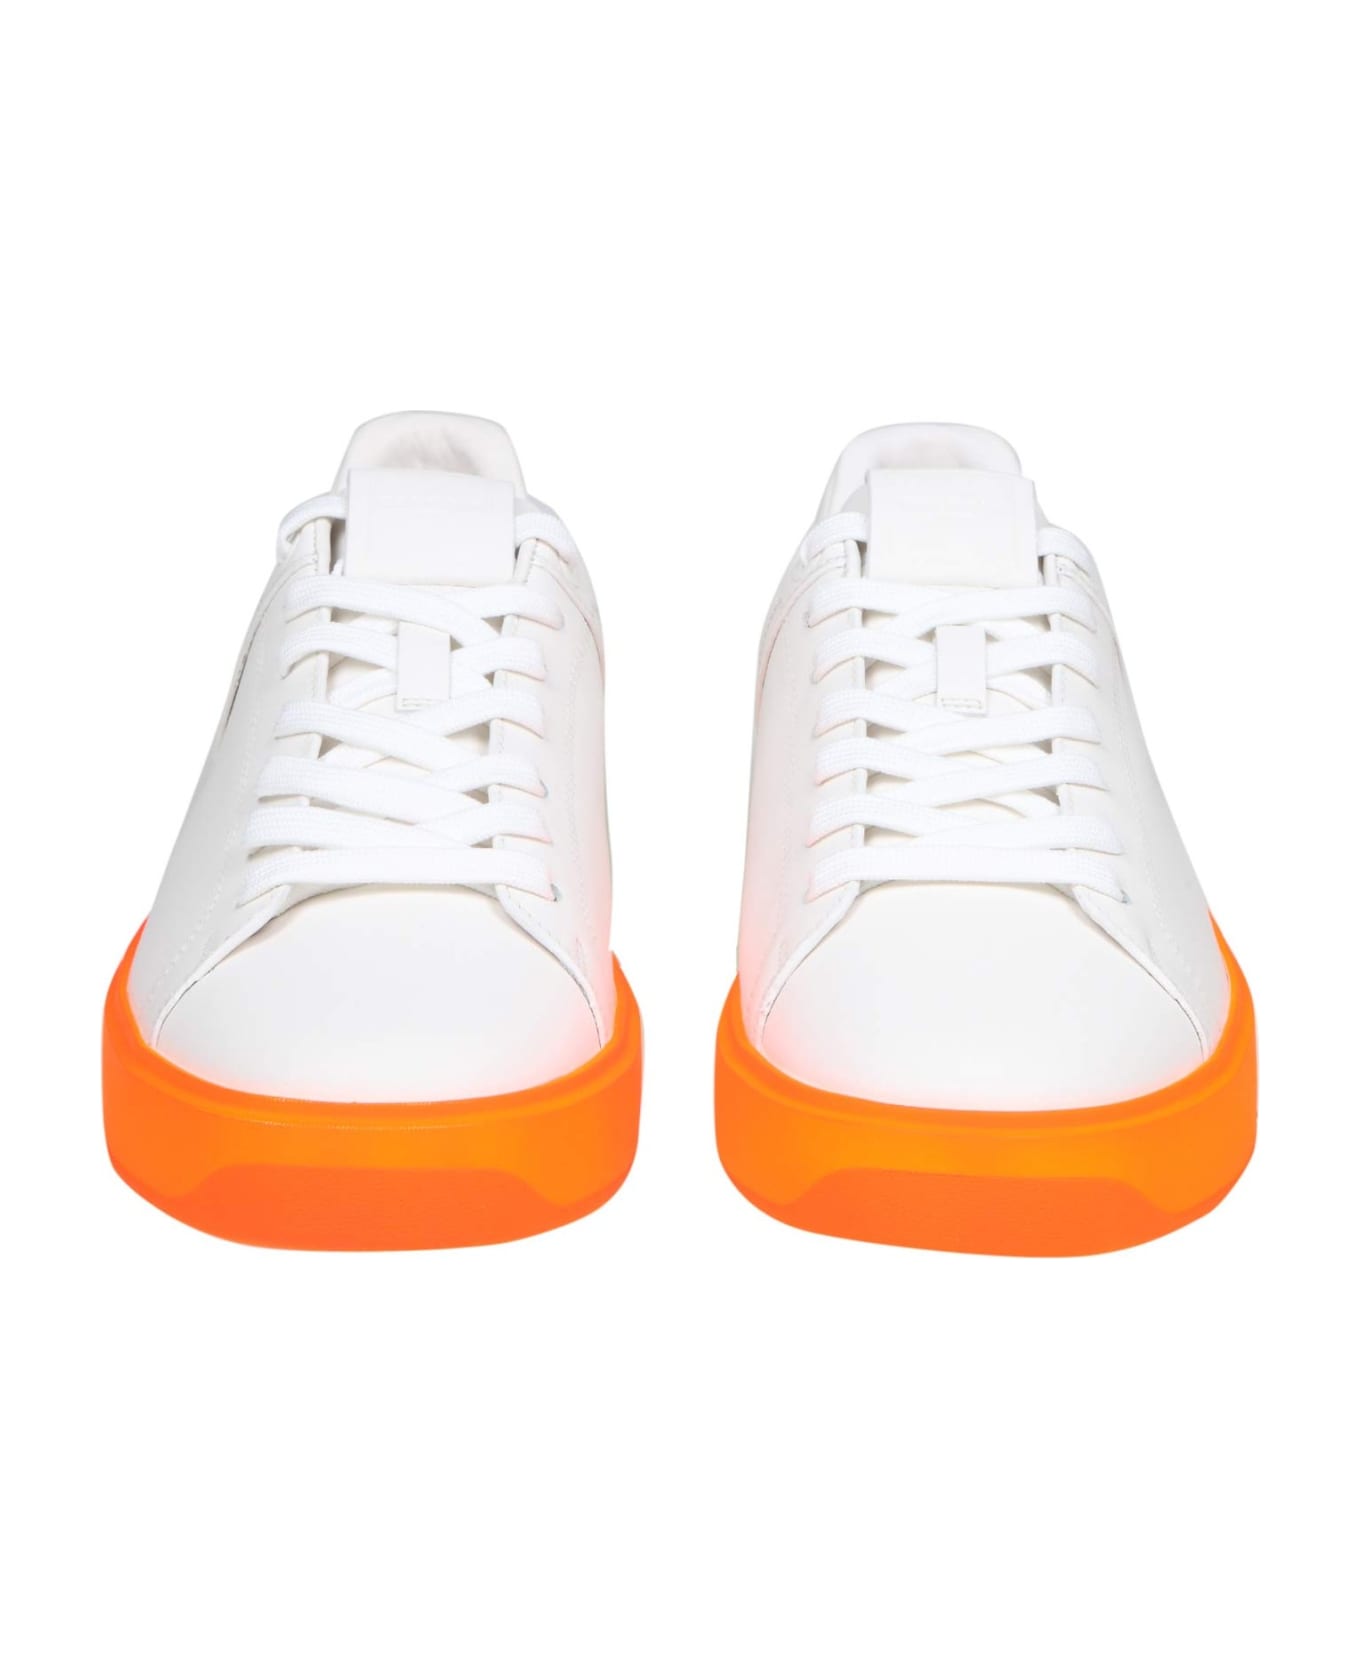 Balmain B Court Sneakers In White Leather With Two-tone Sole - white/multicolor スニーカー